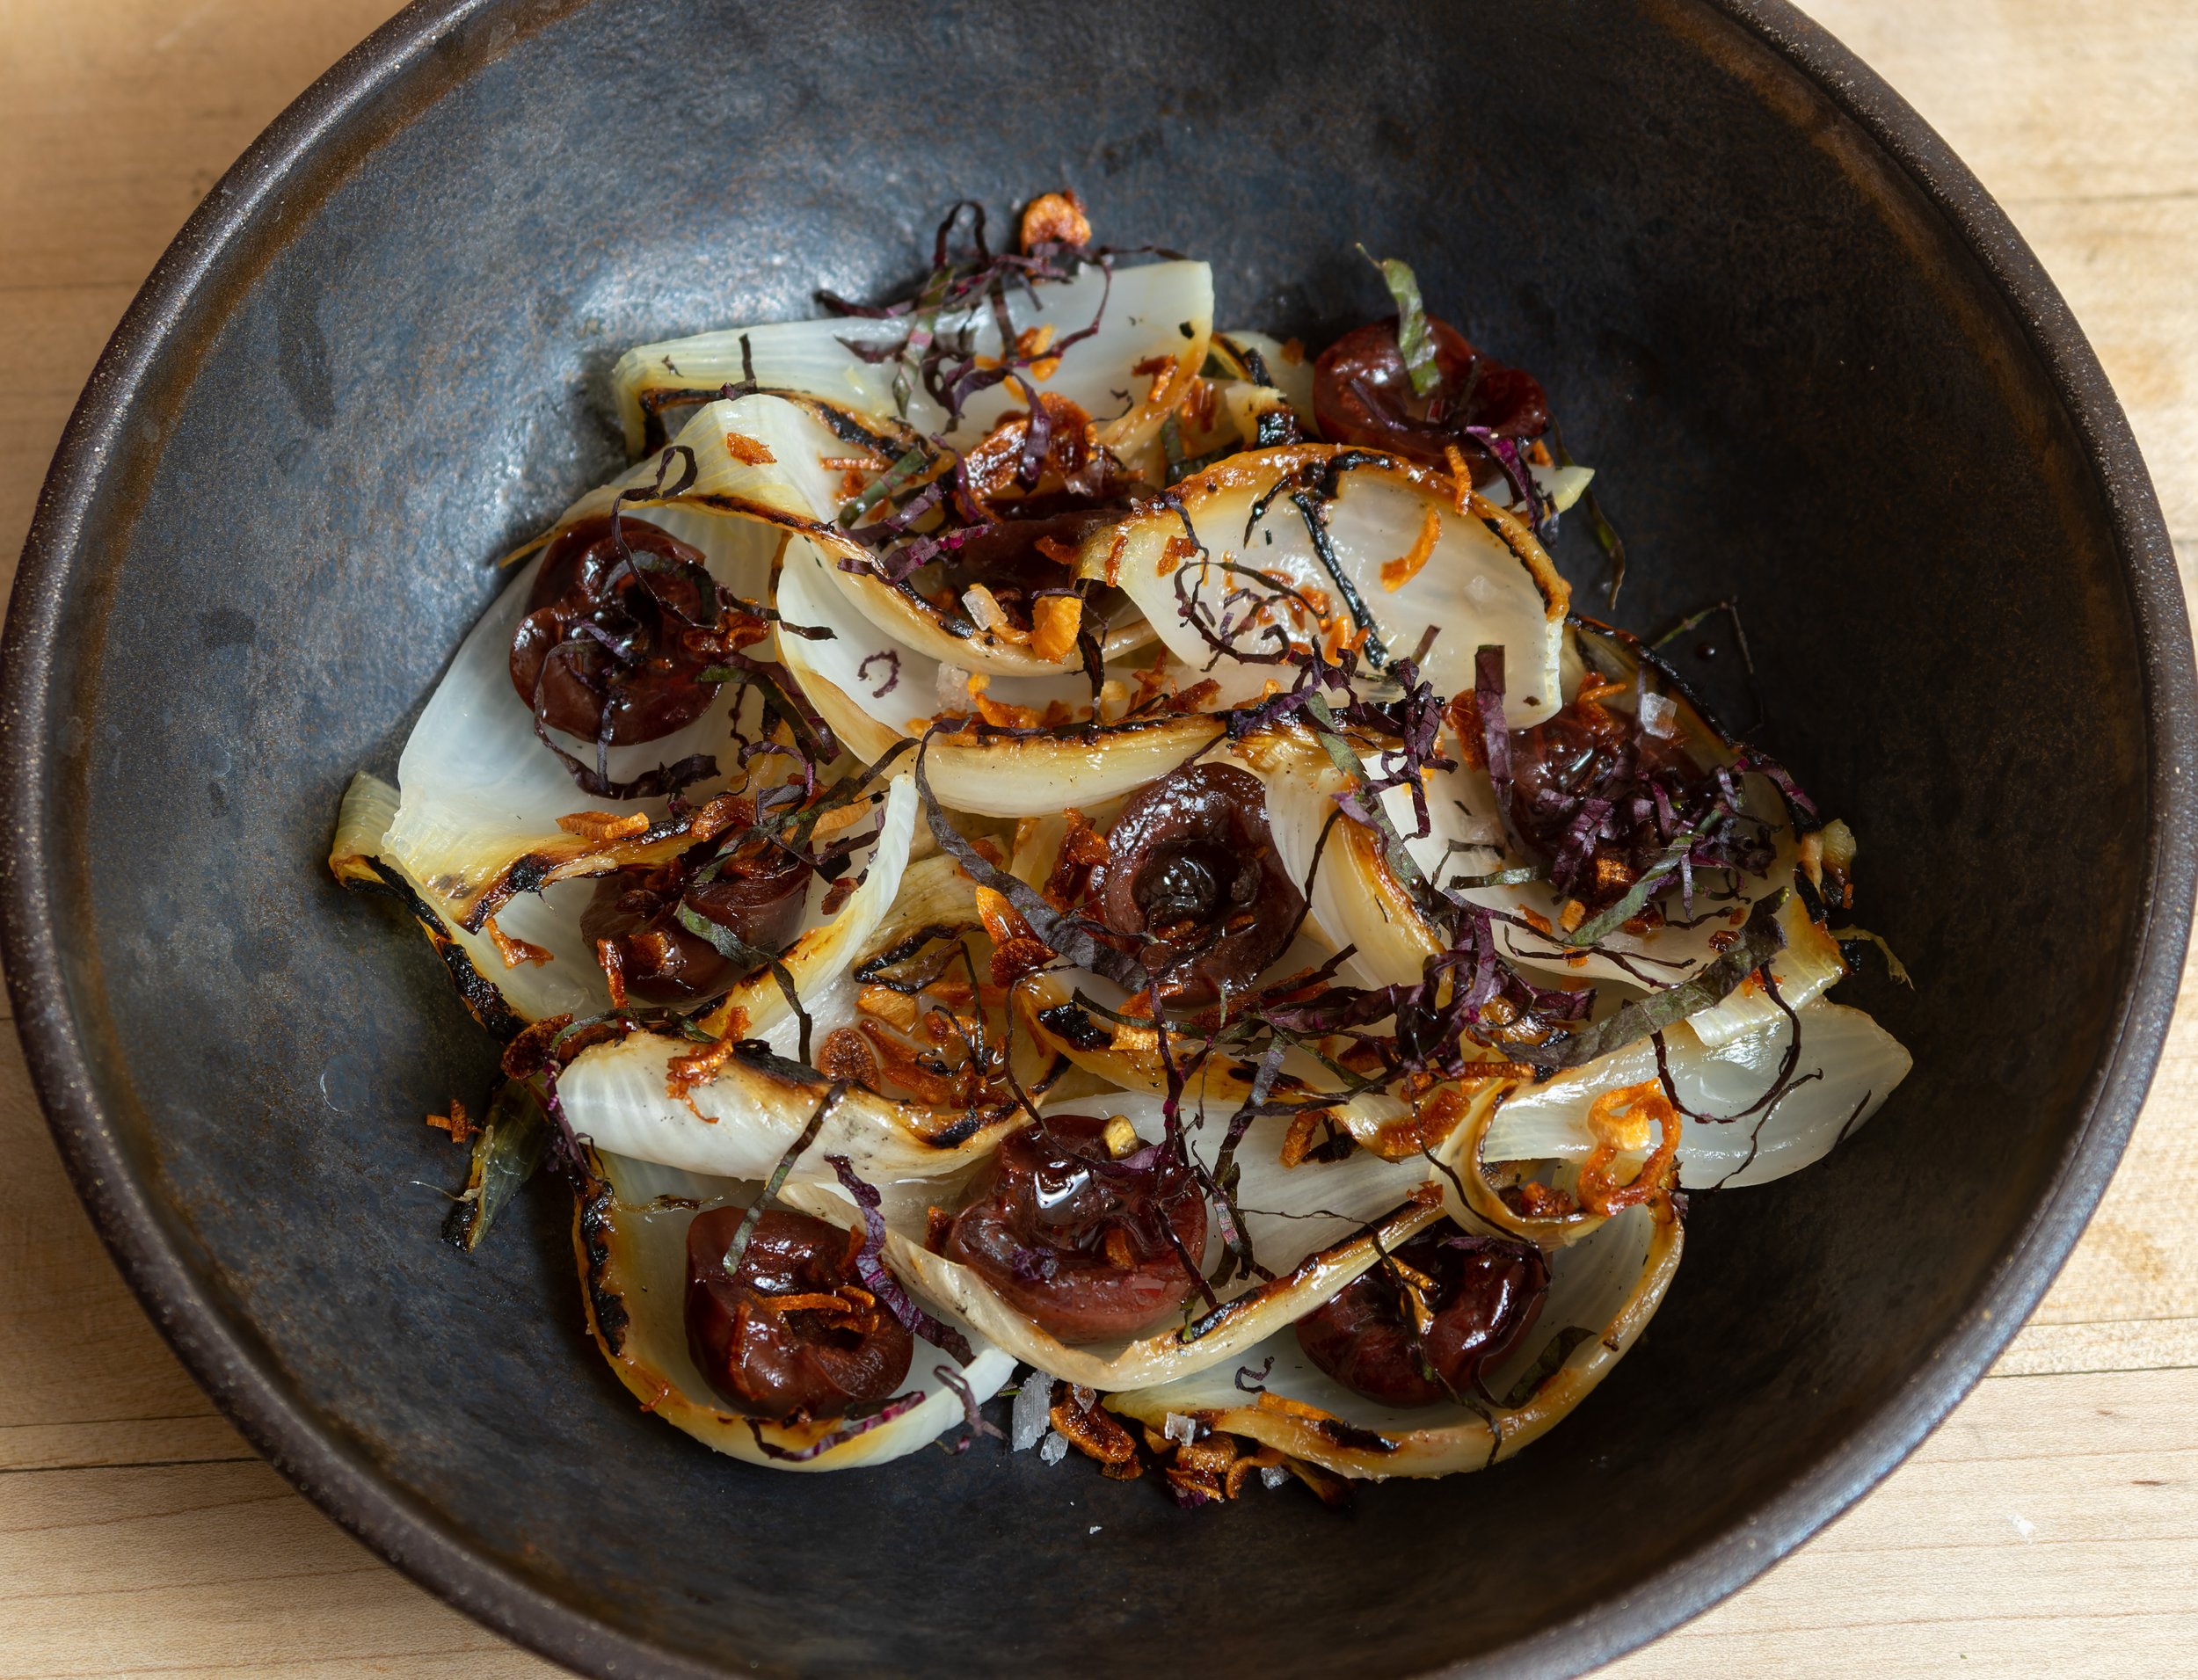 The final dish: Char-grilled Pokey Creek onions with a smoky eggplant dip, cherries pickled in a vinegar made of their own kernels &amp; red Shiso.